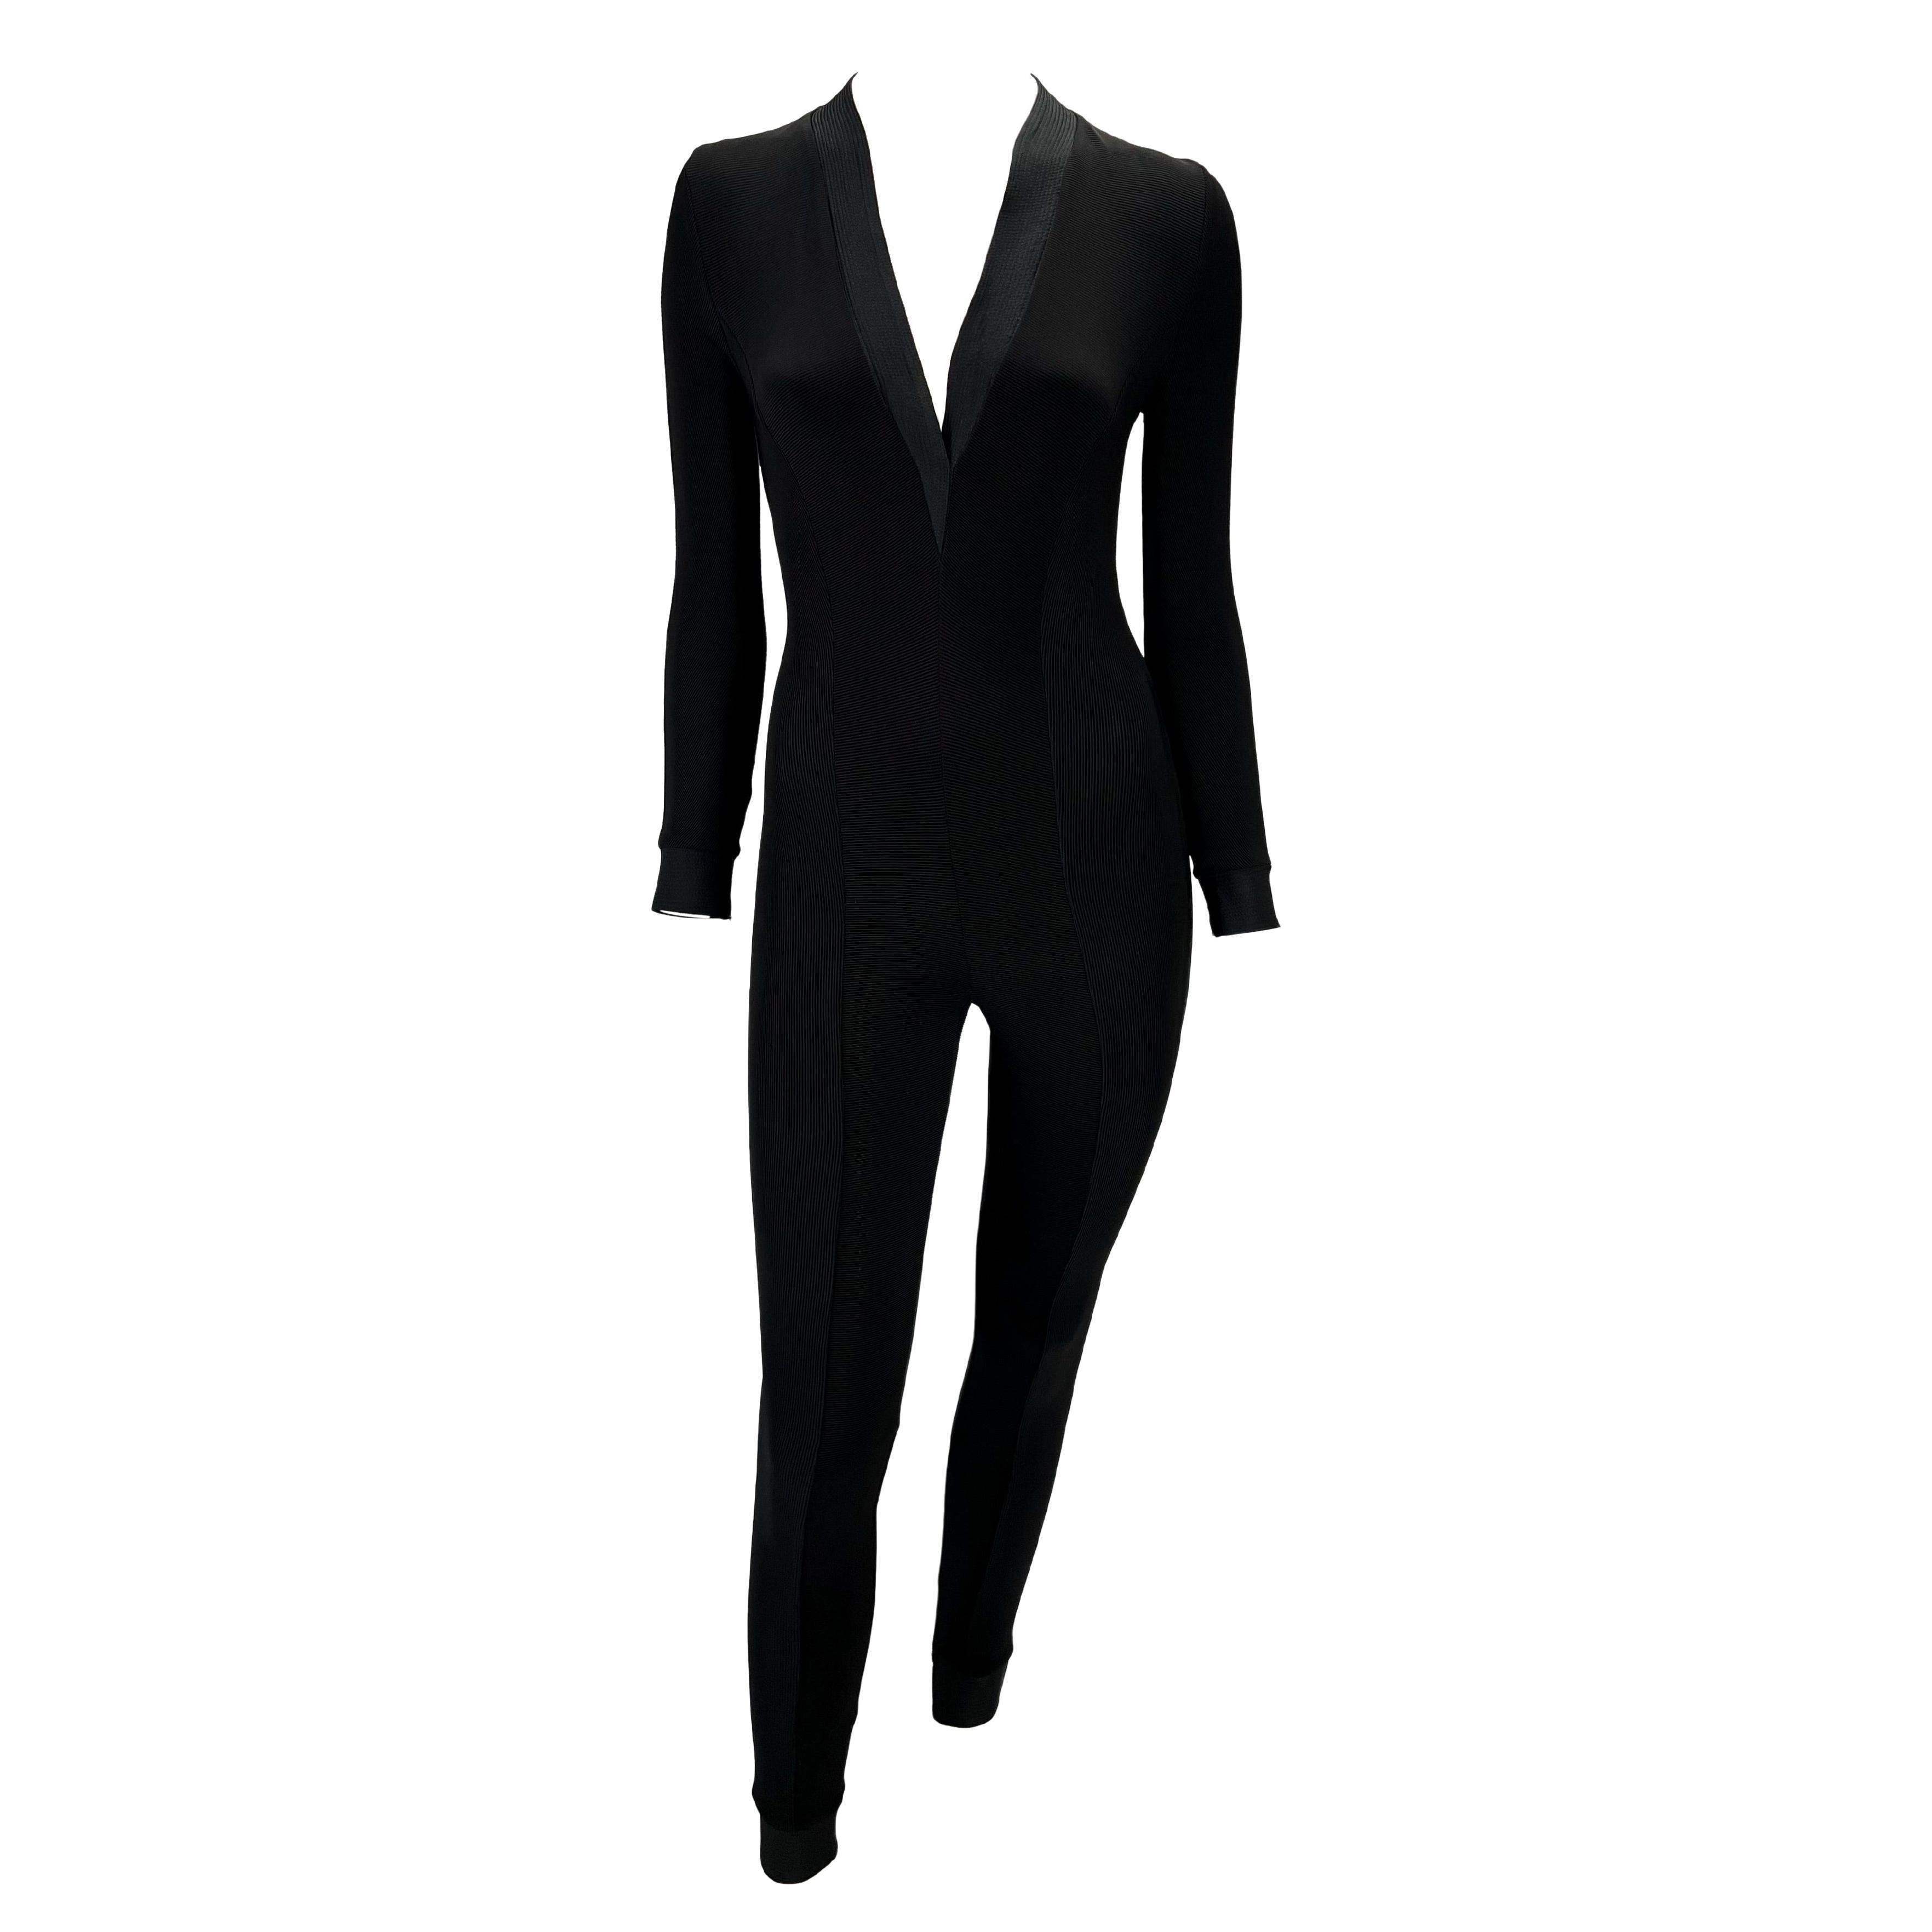 S/S 1992 Gianni Versace Couture Black Ribbed Stretch Plunging Catsuit